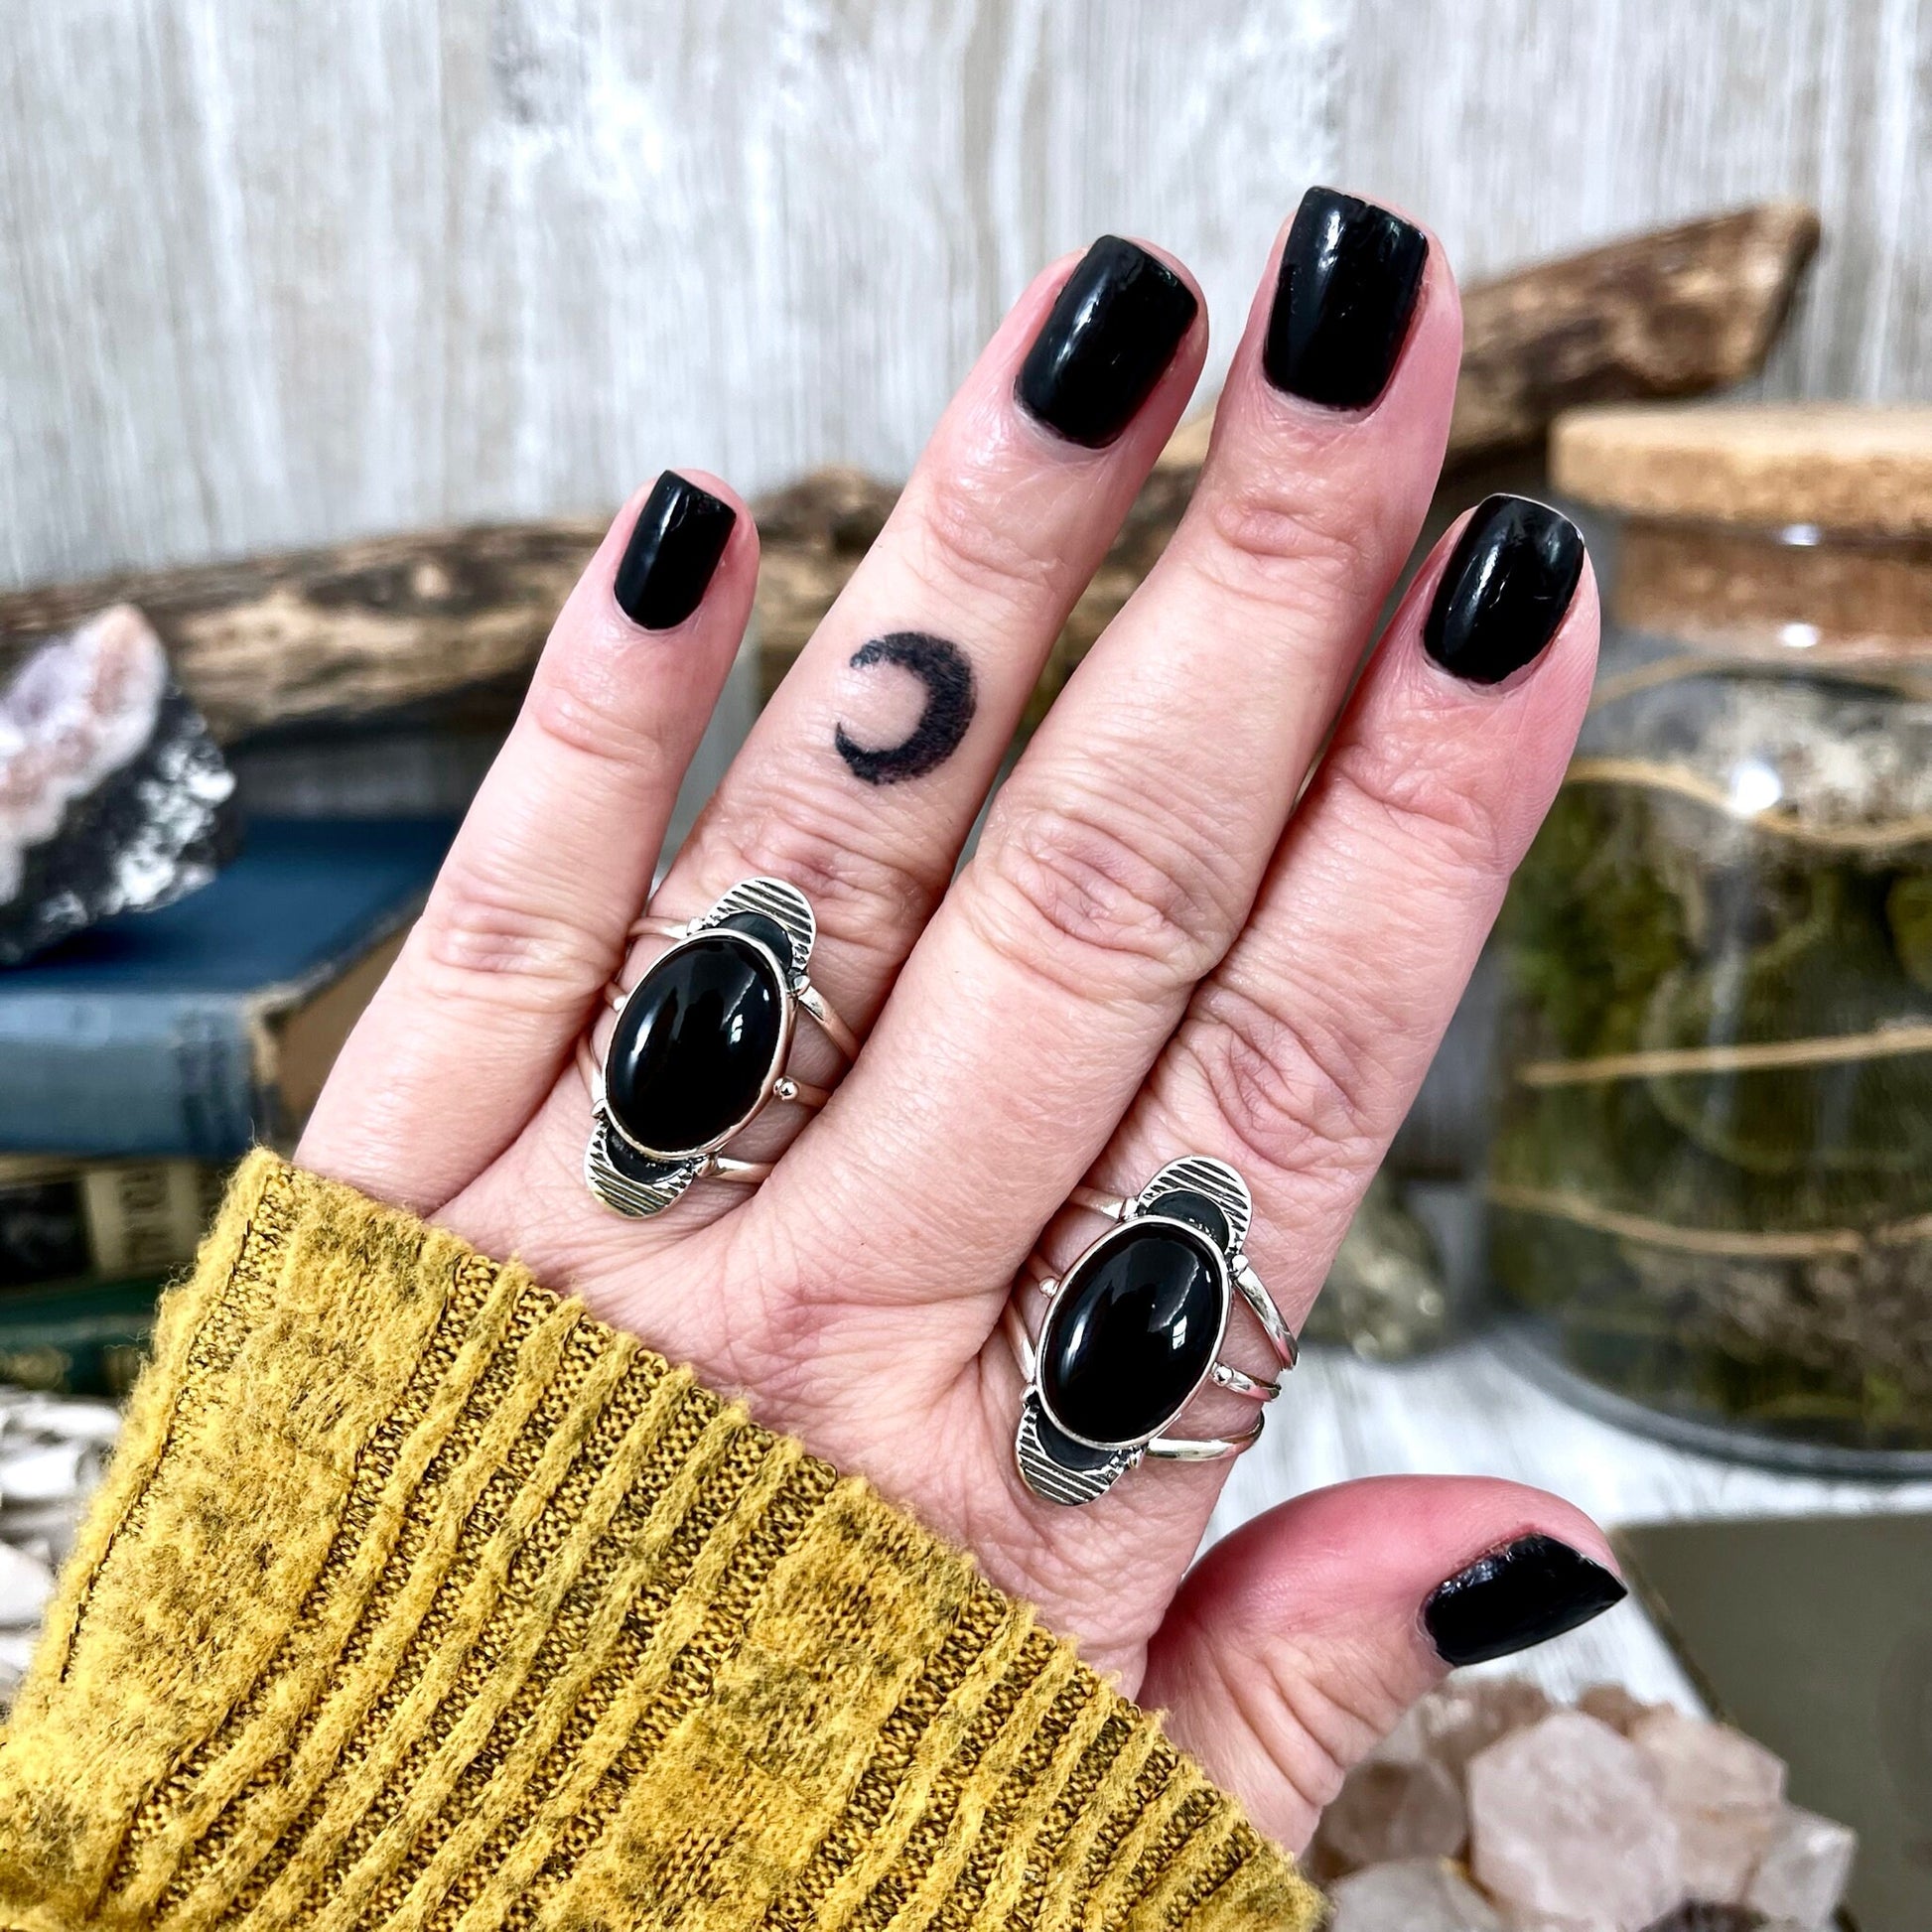 Black Onyx Ring, Black Stone Ring, Bohemian Jewelry, Bohemian Ring, boho jewelry, boho ring, crystal ring, Etsy ID: 1398368019, FOXLARK- RINGS, Gothic Jewelry, gypsy ring, Jewelry, Moon Jewelry, Moon Ring, Rings, Statement Rings, Witch Jewelry, Witchy Jew